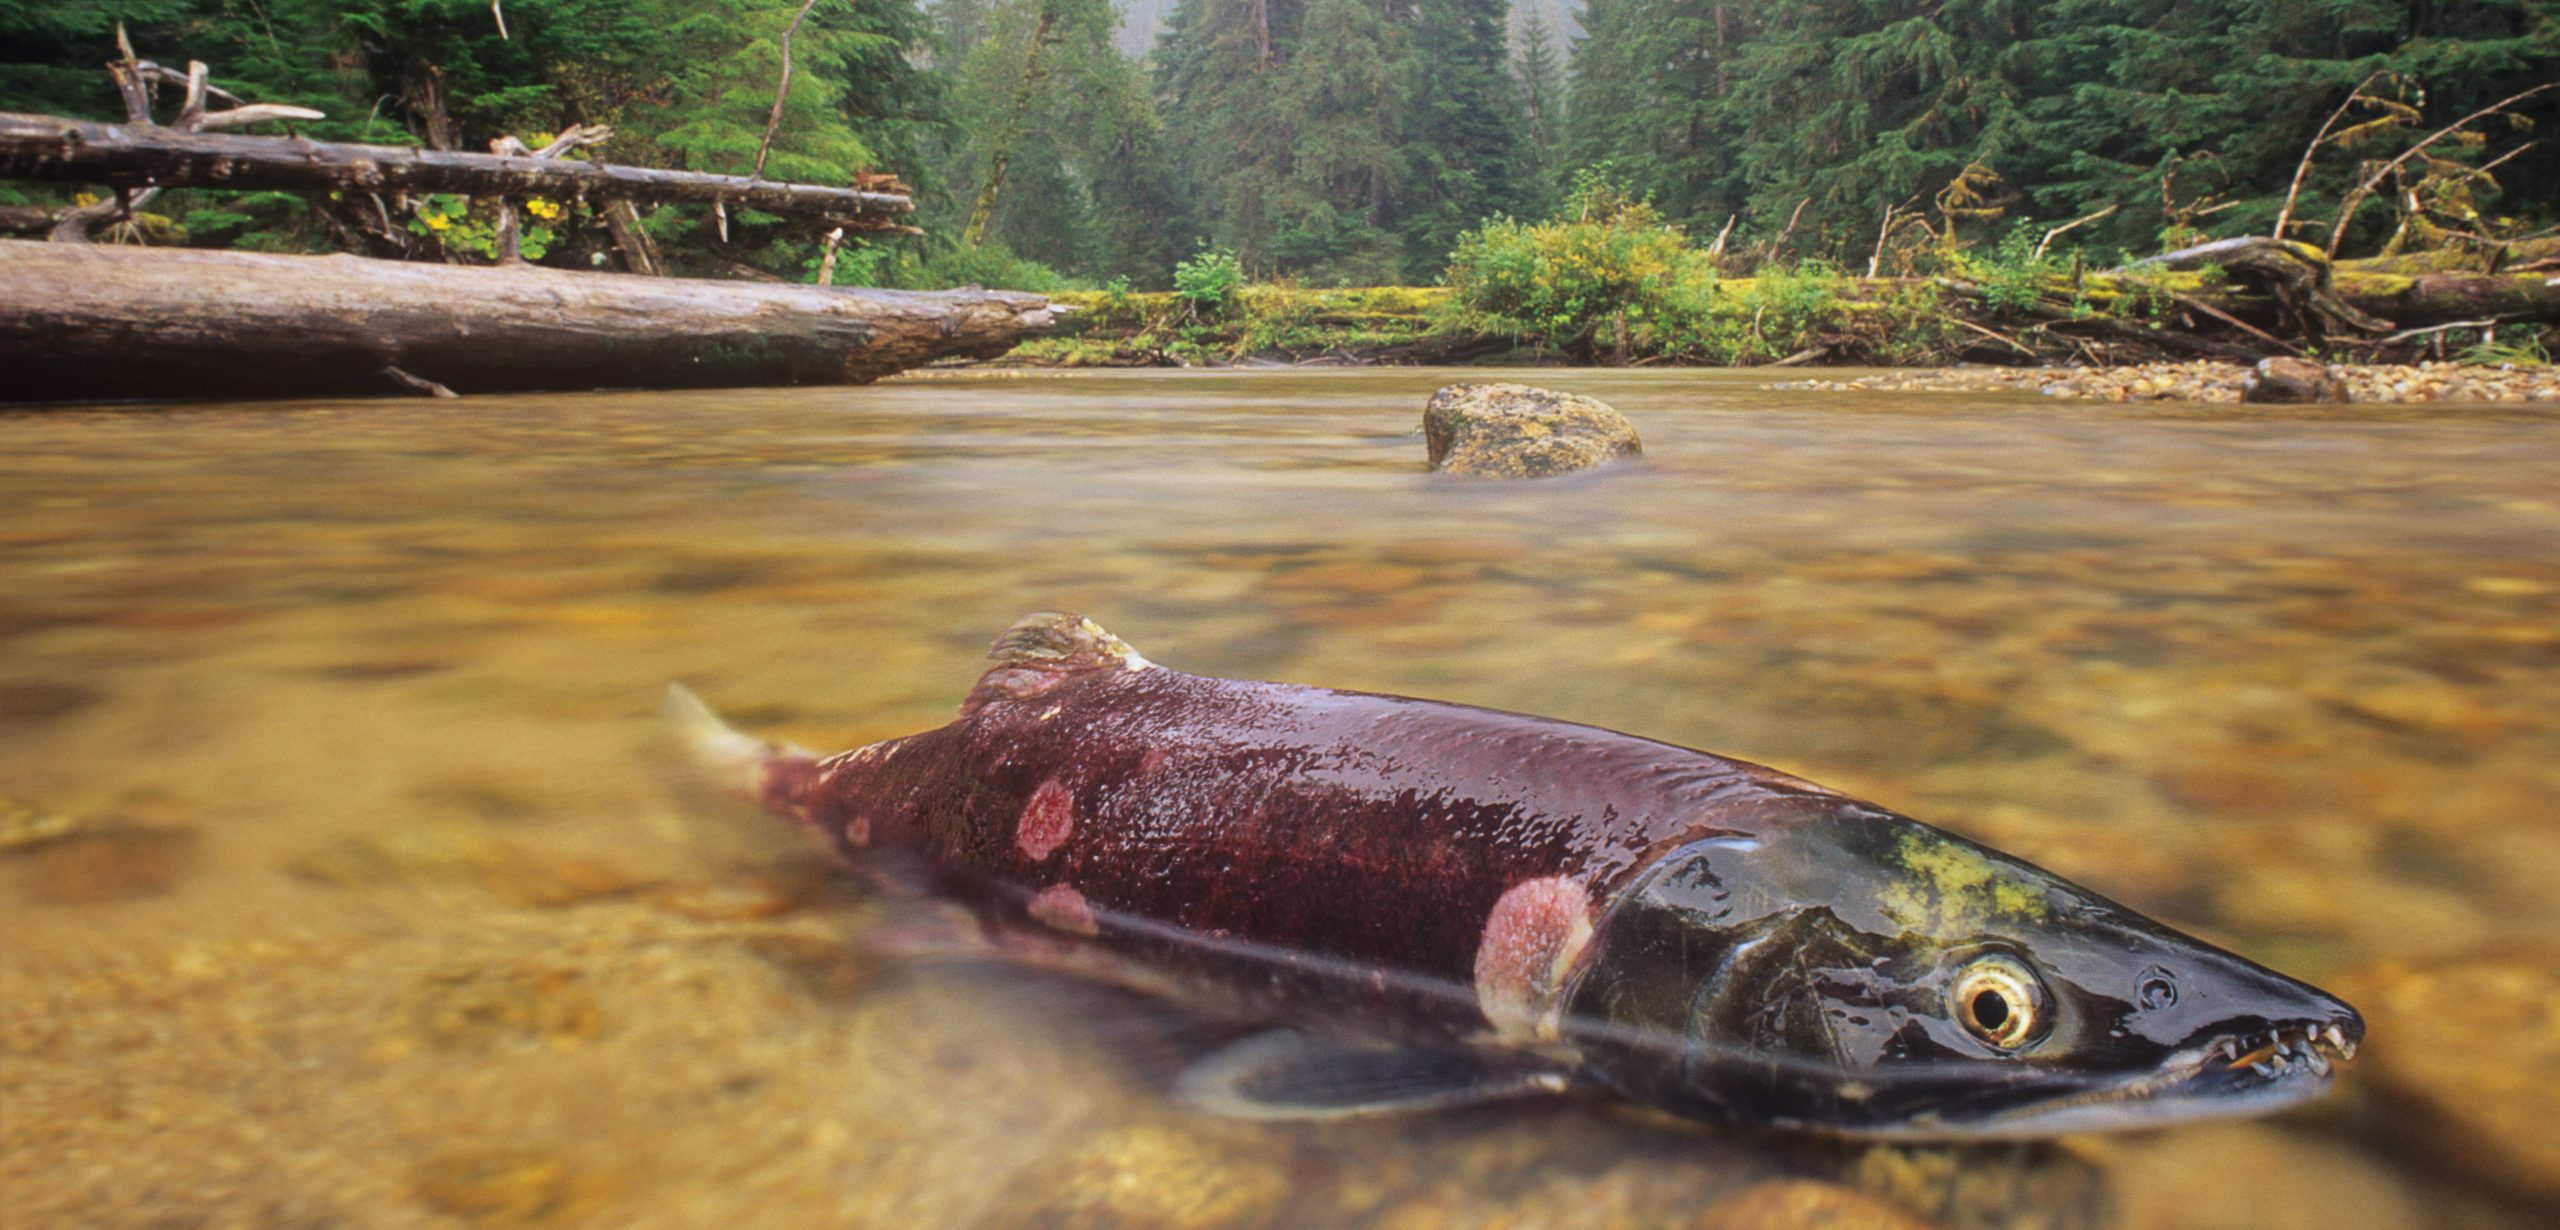 As the link between ocean and land, salmon deliver marine nutrients that feed coastal rainforests. Photo by Ian McAllister/All Canada Photos/Corbis